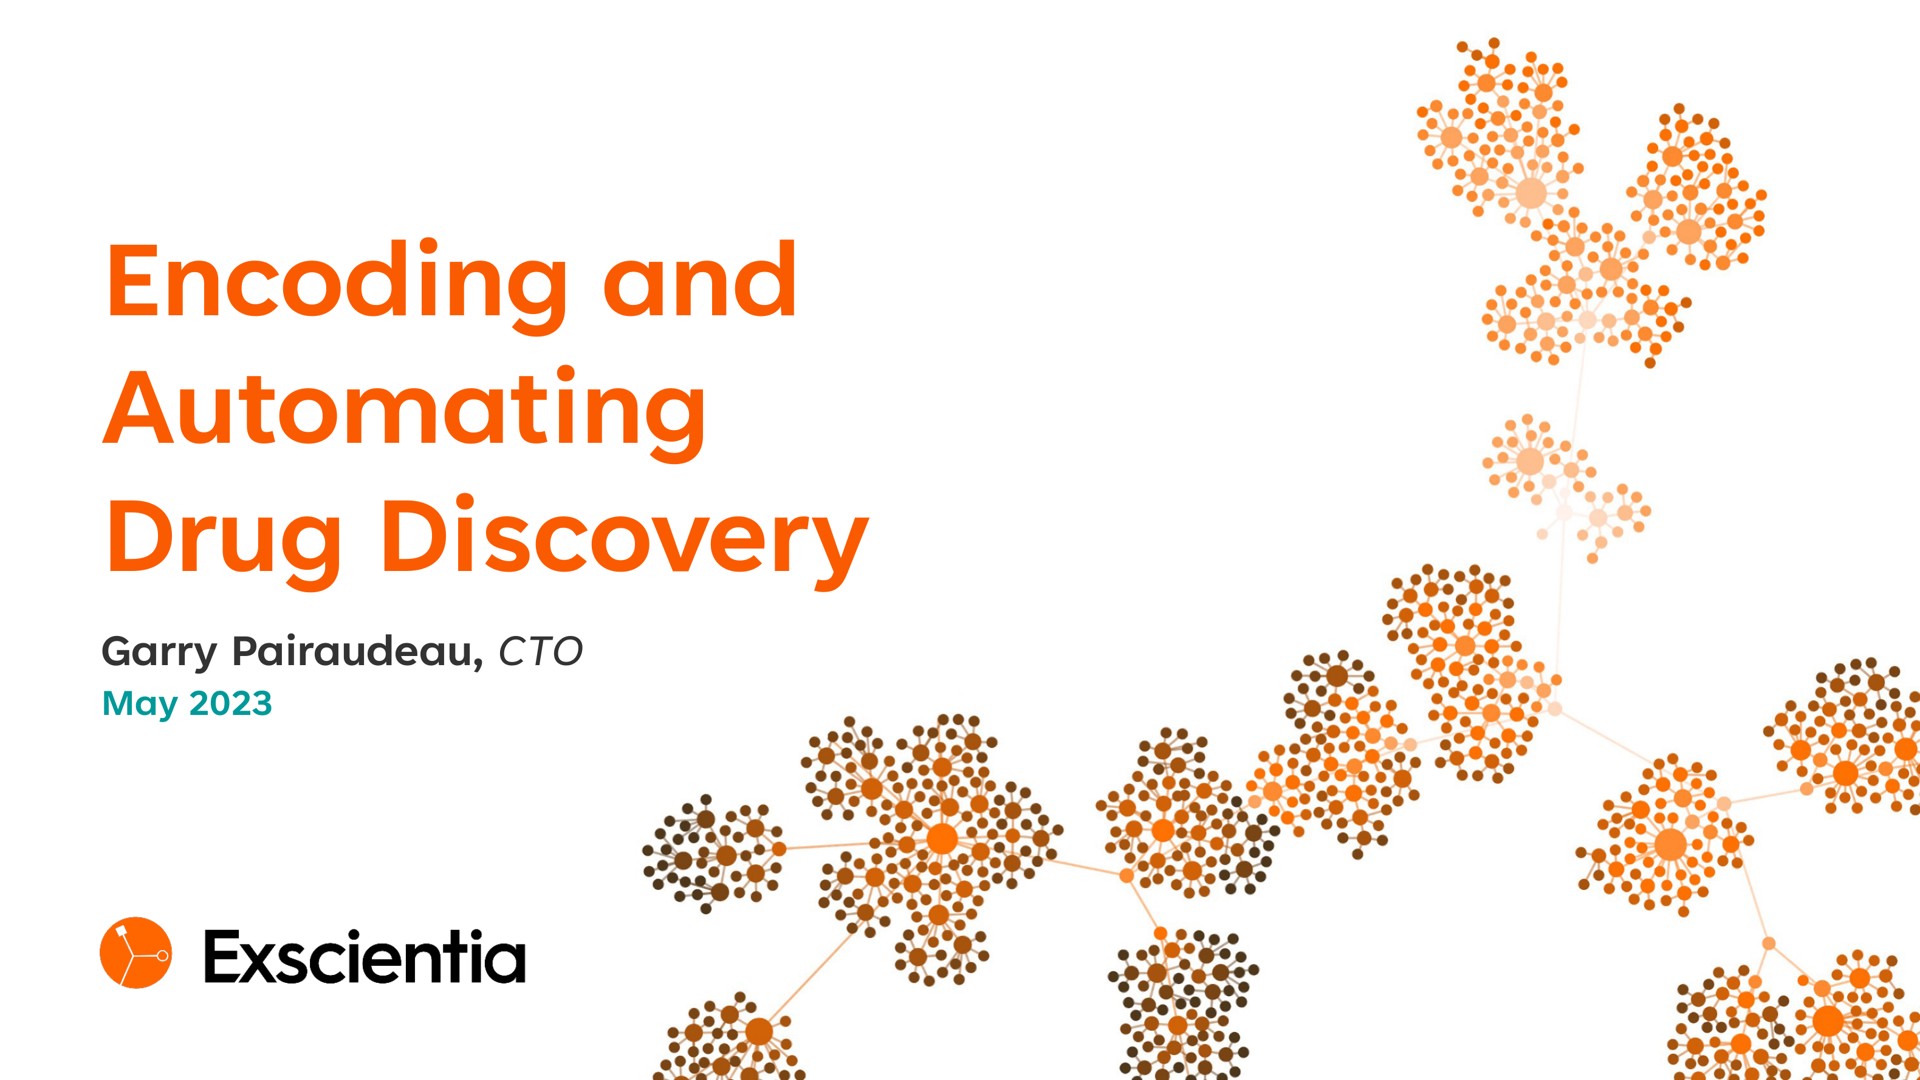 encoding and drug discovery a may a geet ose aes | Exscientia